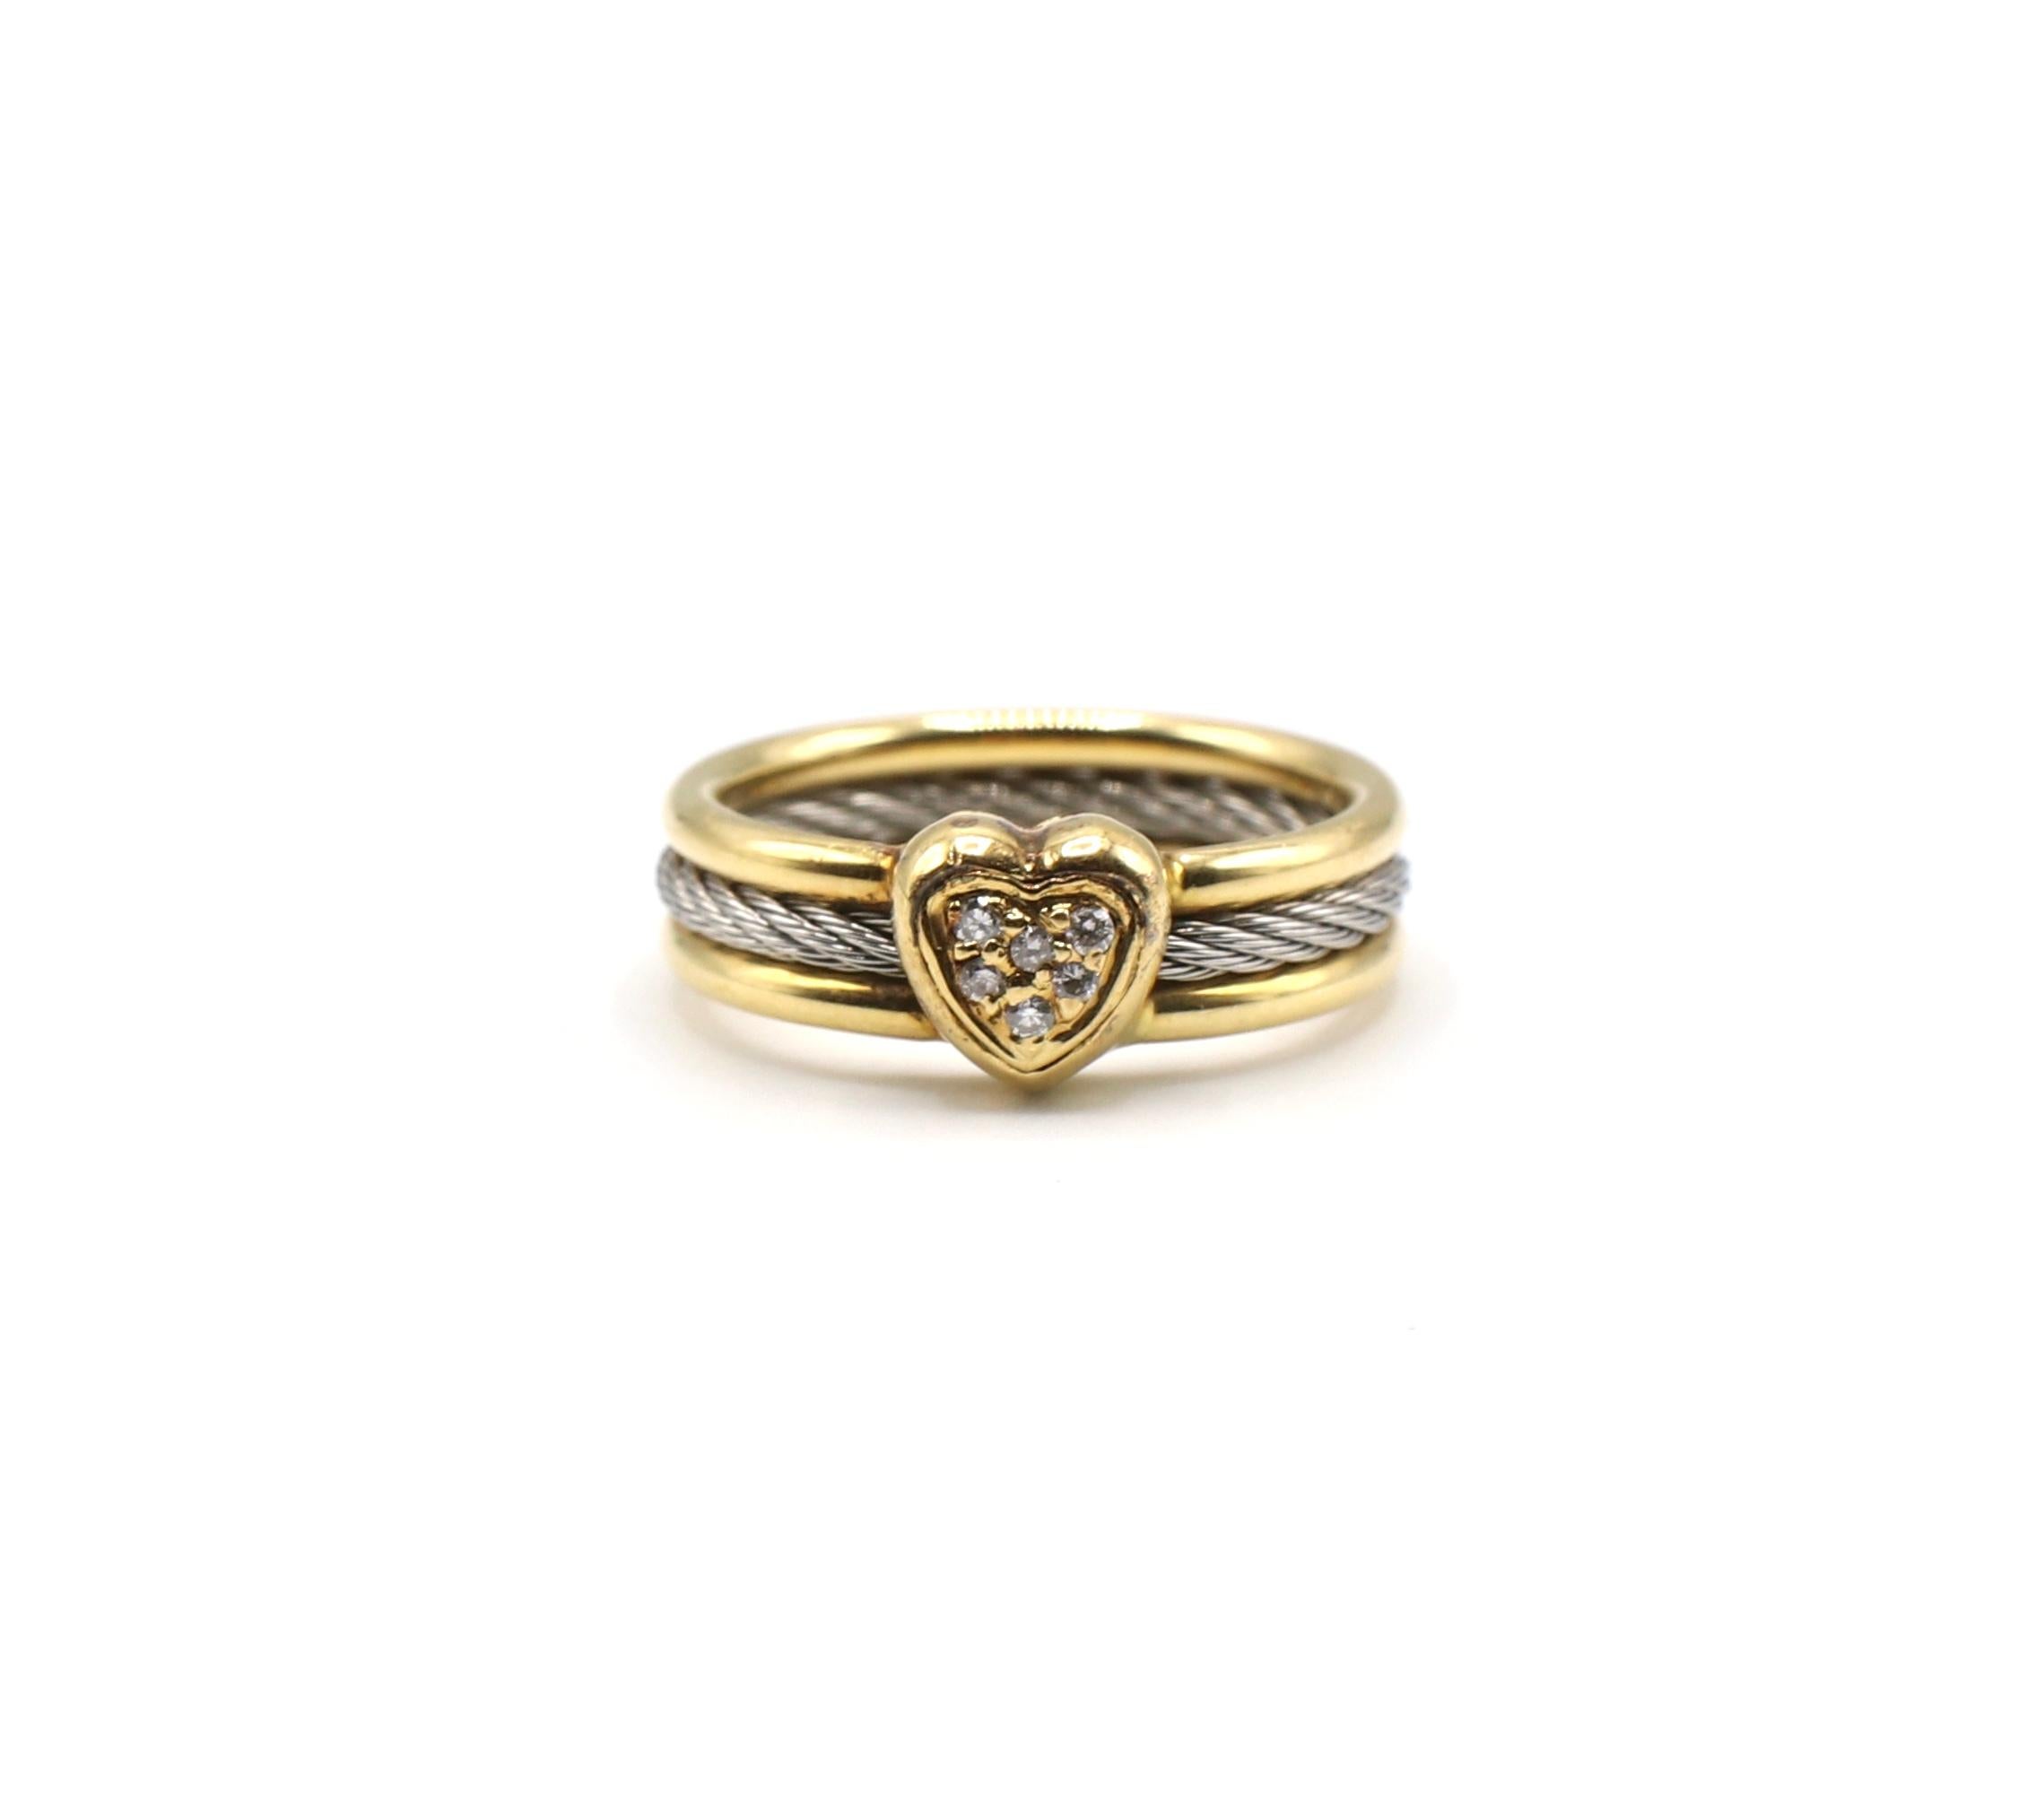 Charriol 18K & Stainless Steel Heart Cluster Diamond Cable Ring Size 5

Metal: 18k Yellow Gold / Stainless Steel
Weight: 3.90 grams
Diamonds: 6 round diamonds measuring approx. .06 CTW G VS
Finger Size: 5
Measurements: Ring Width is 5mm
Stamped: